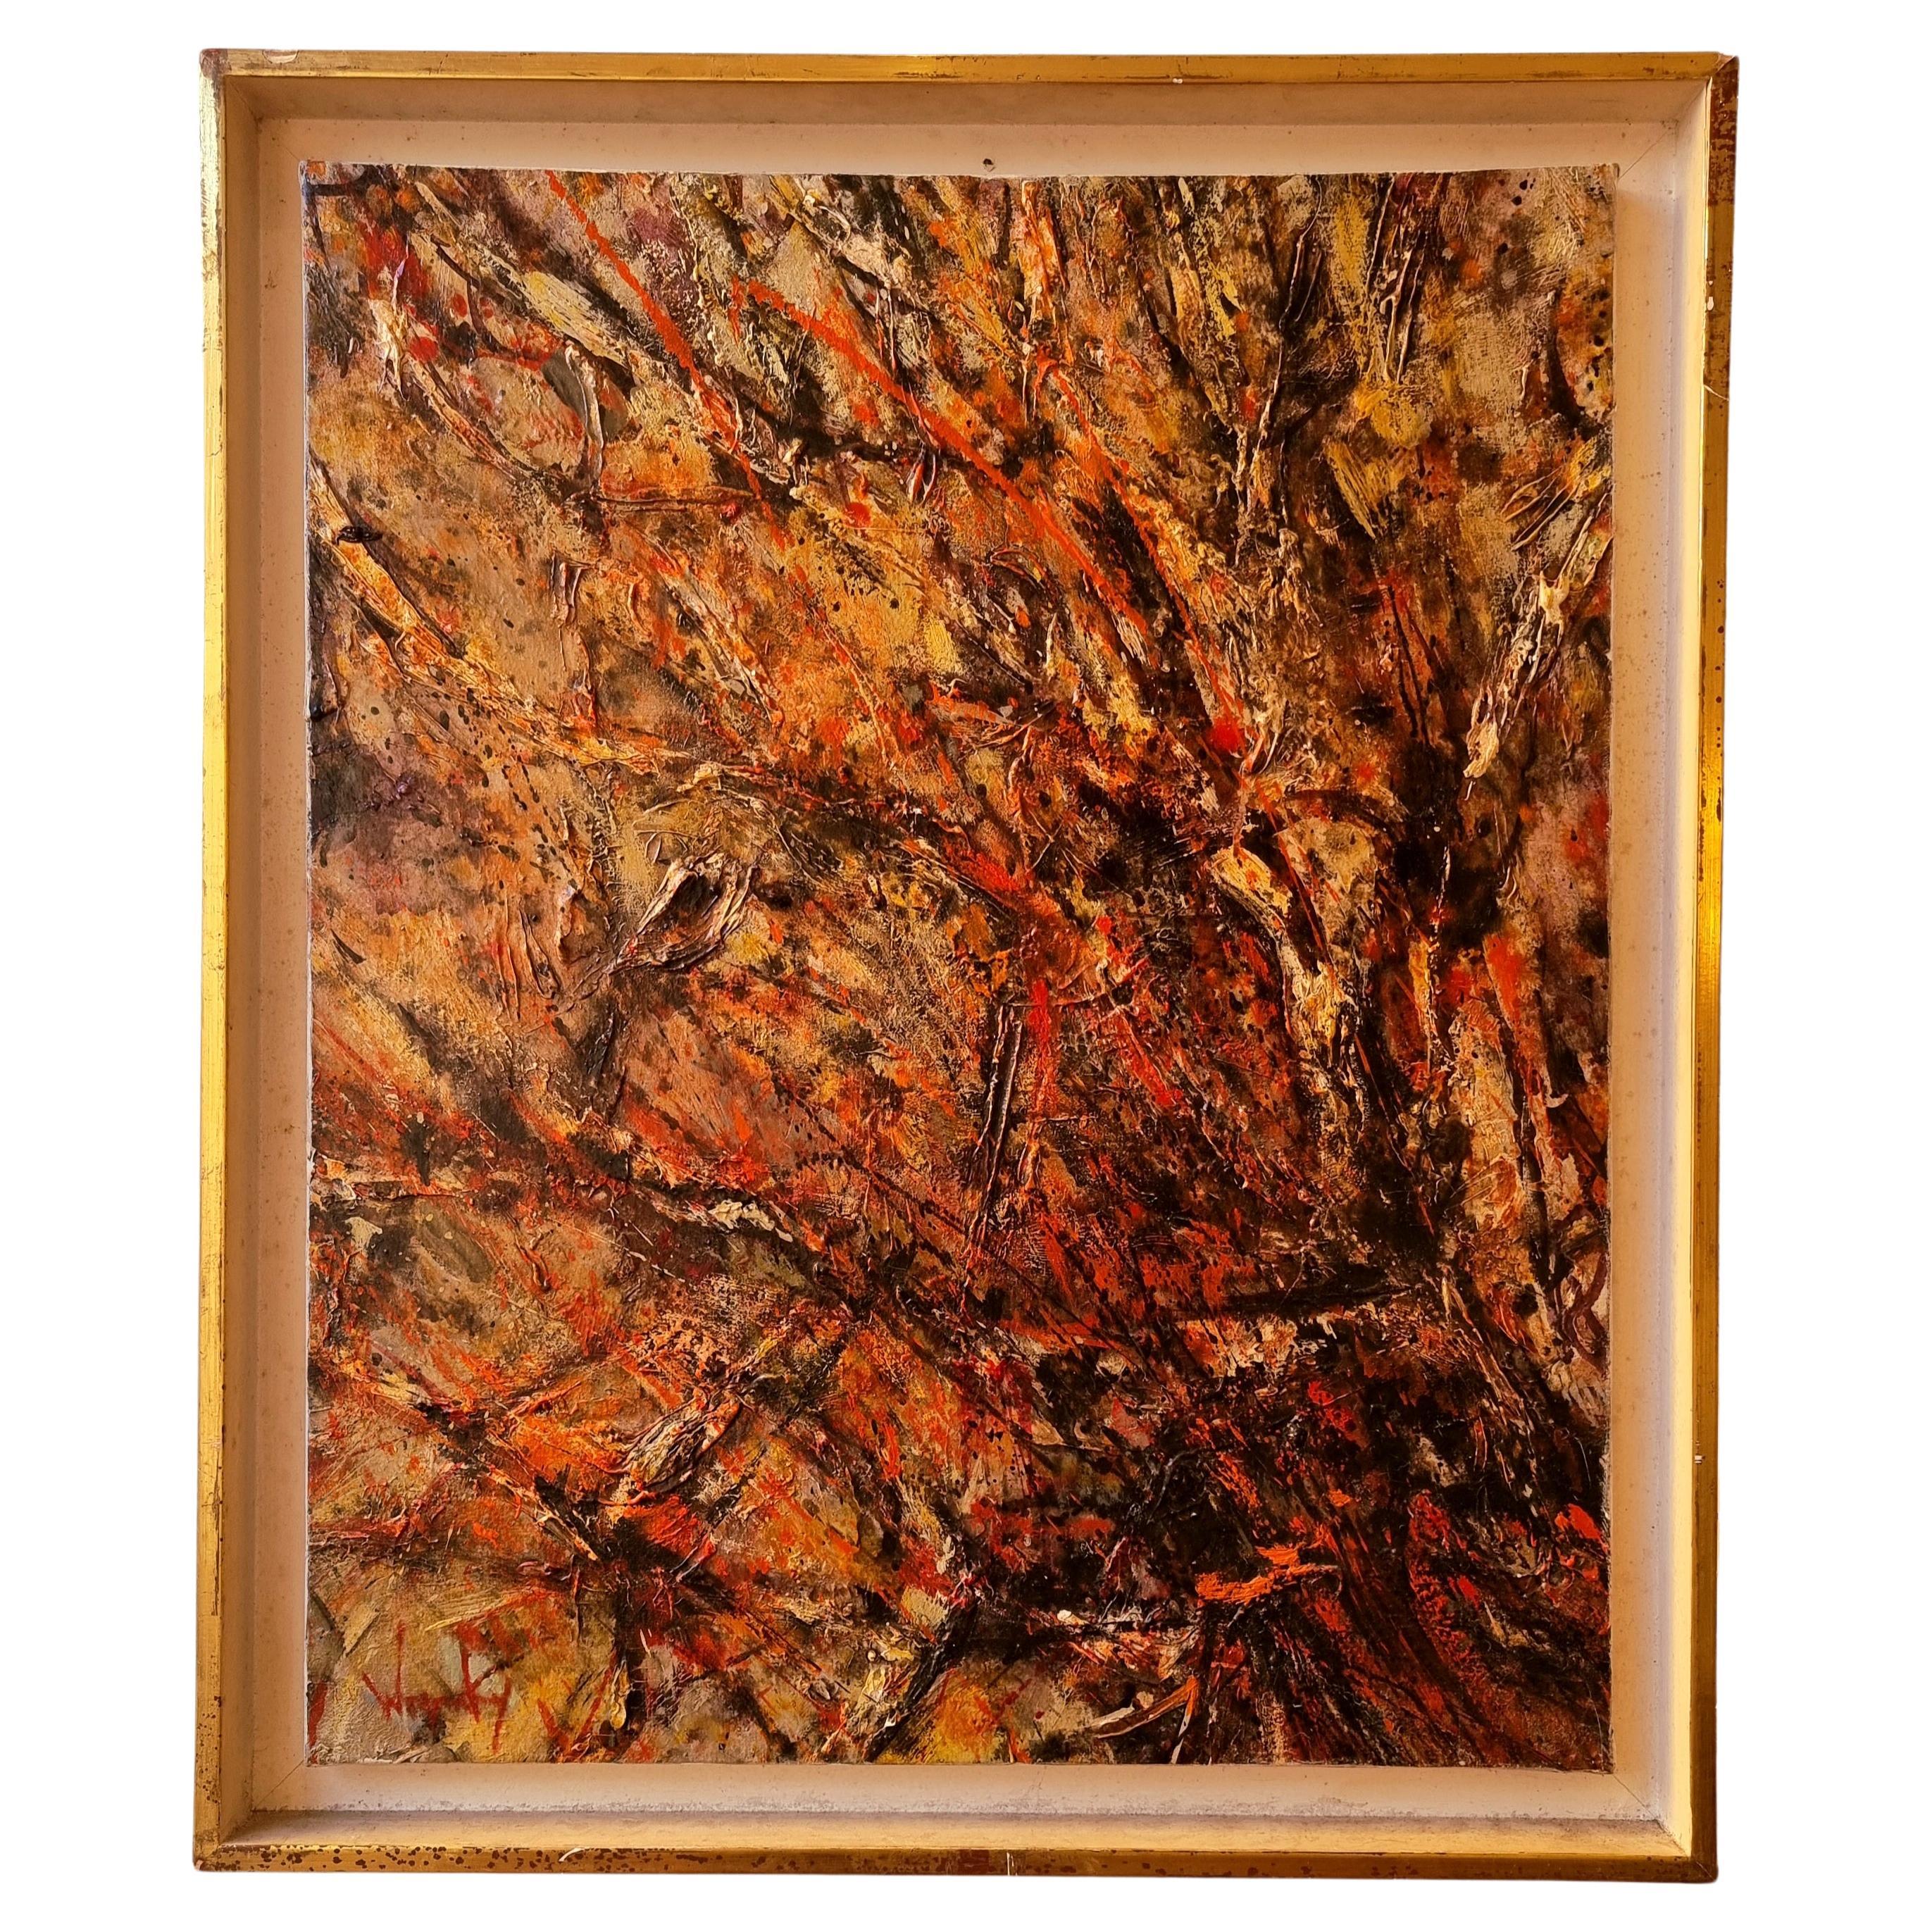 Abstract Painting, "Tree of Fire" by Robert Wogensky, Oil on Canvas, Ca 1960